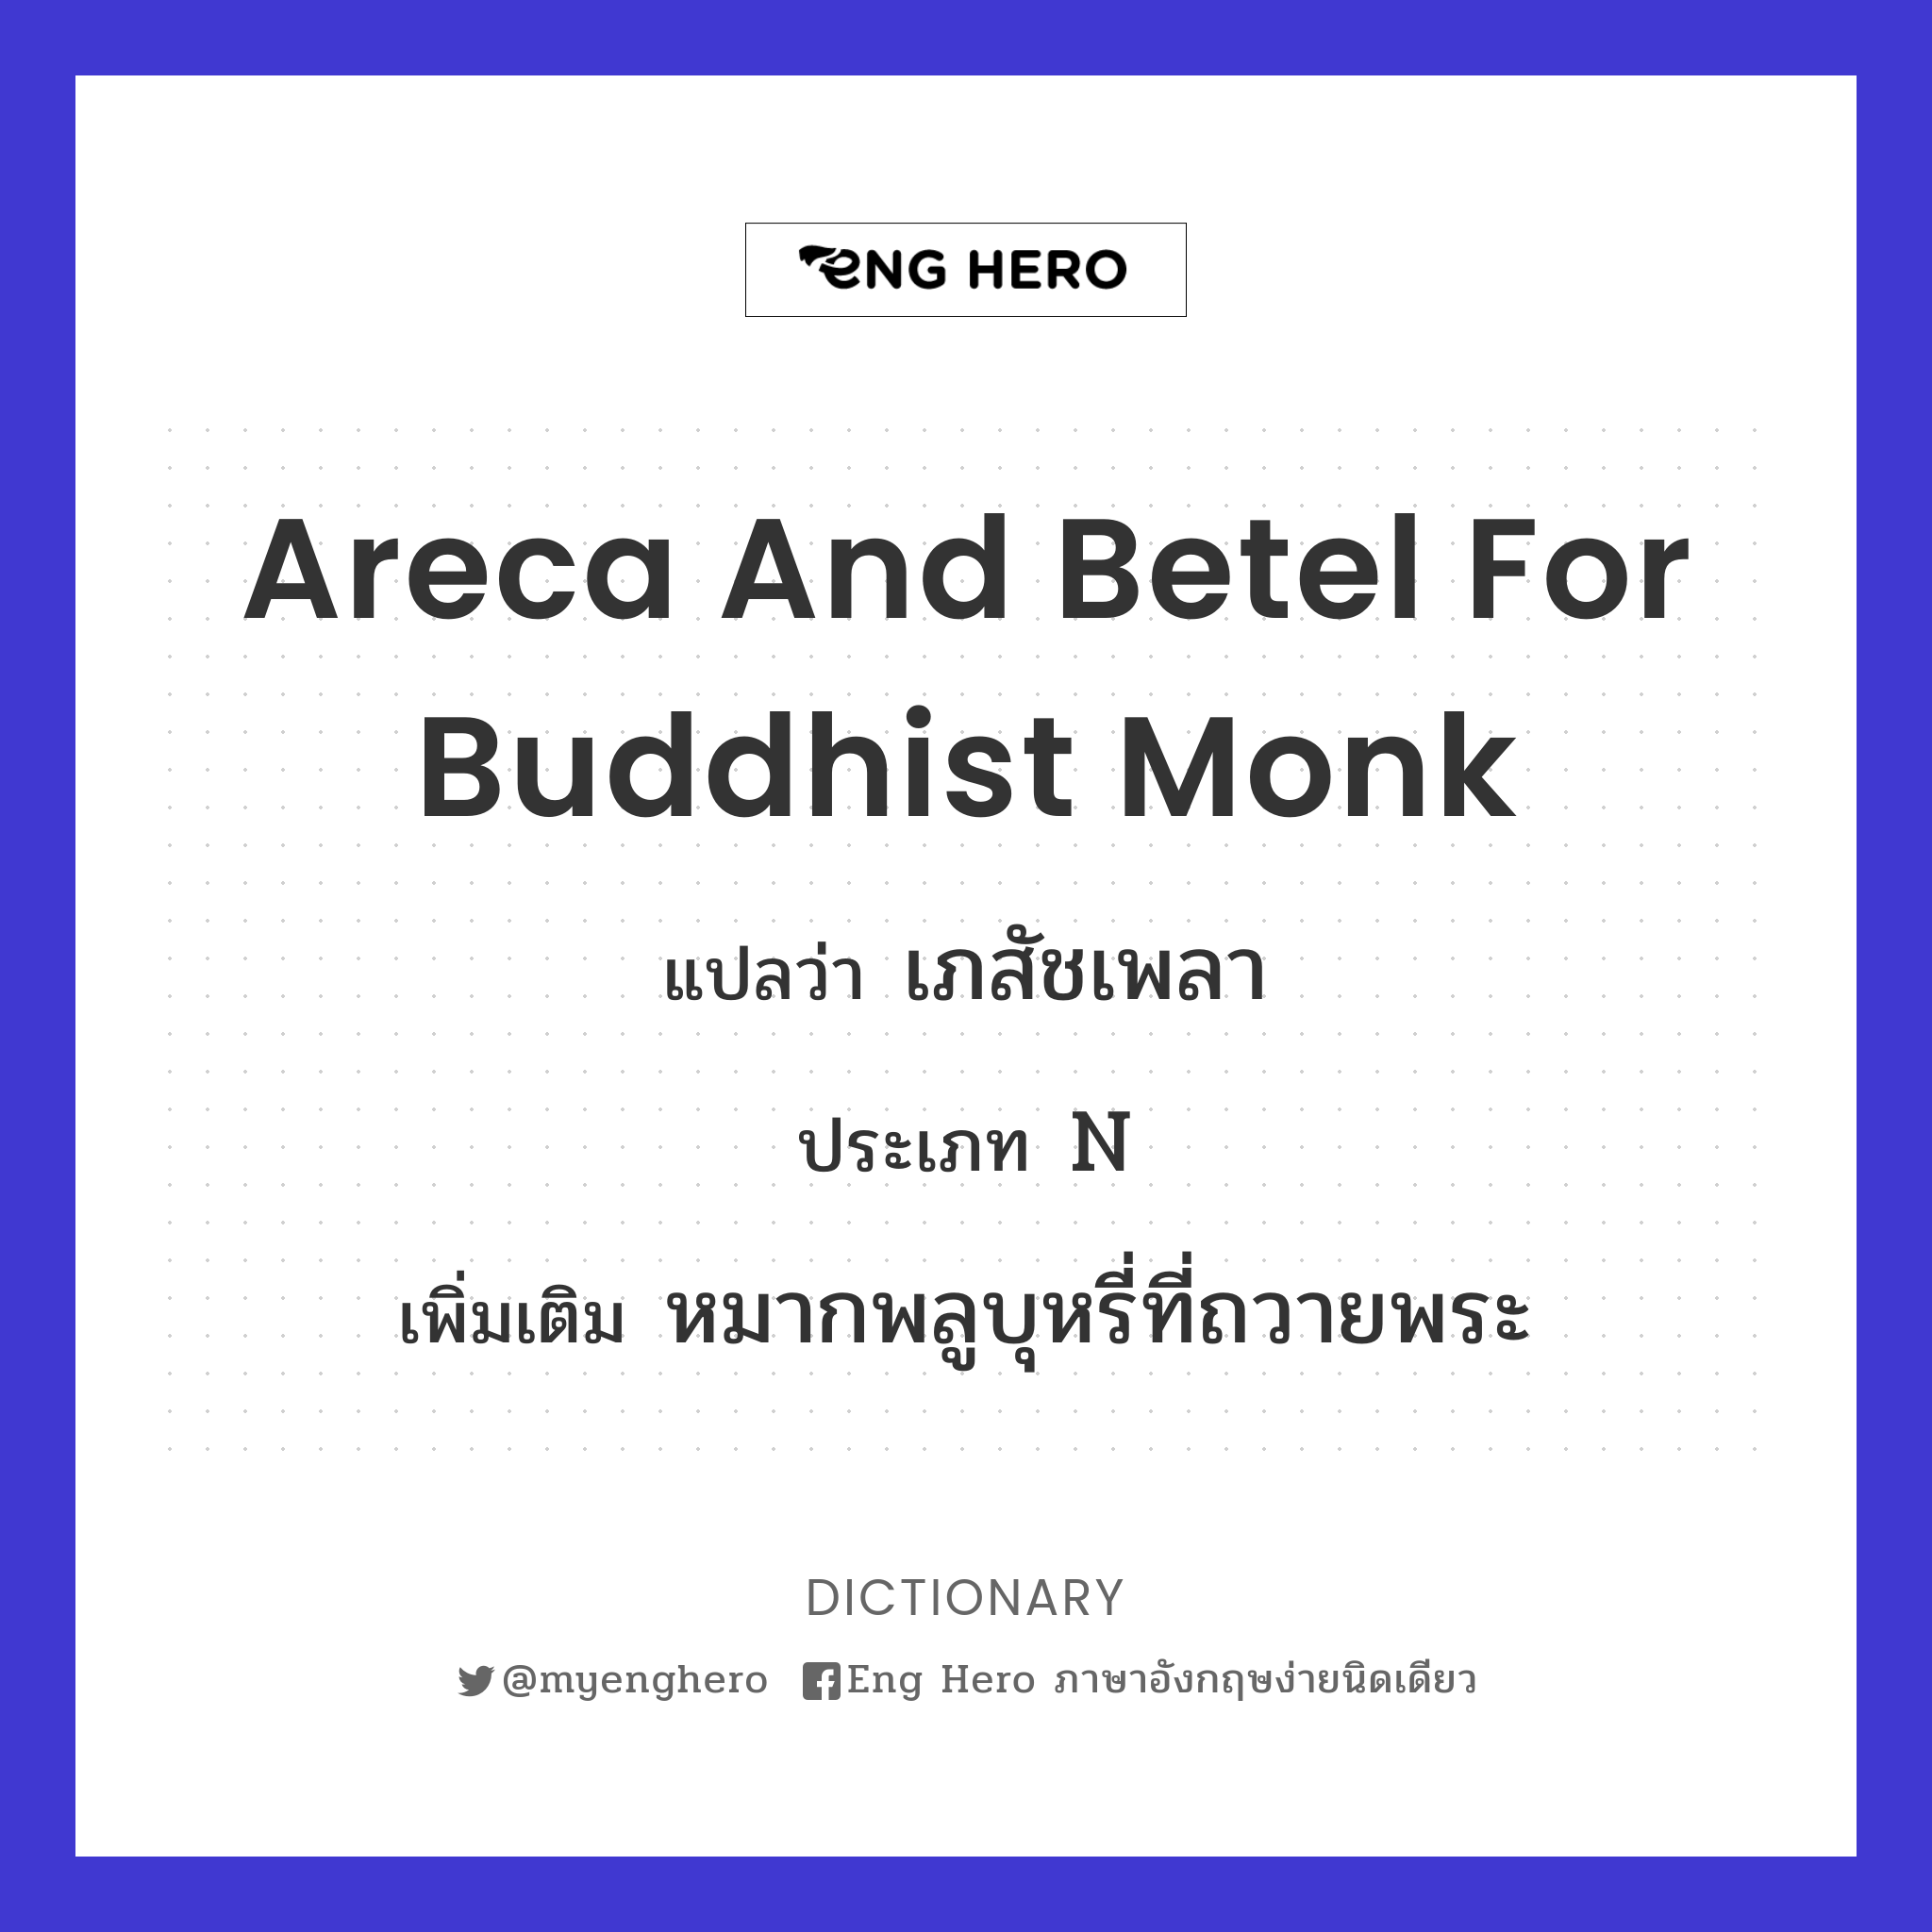 areca and betel for Buddhist monk